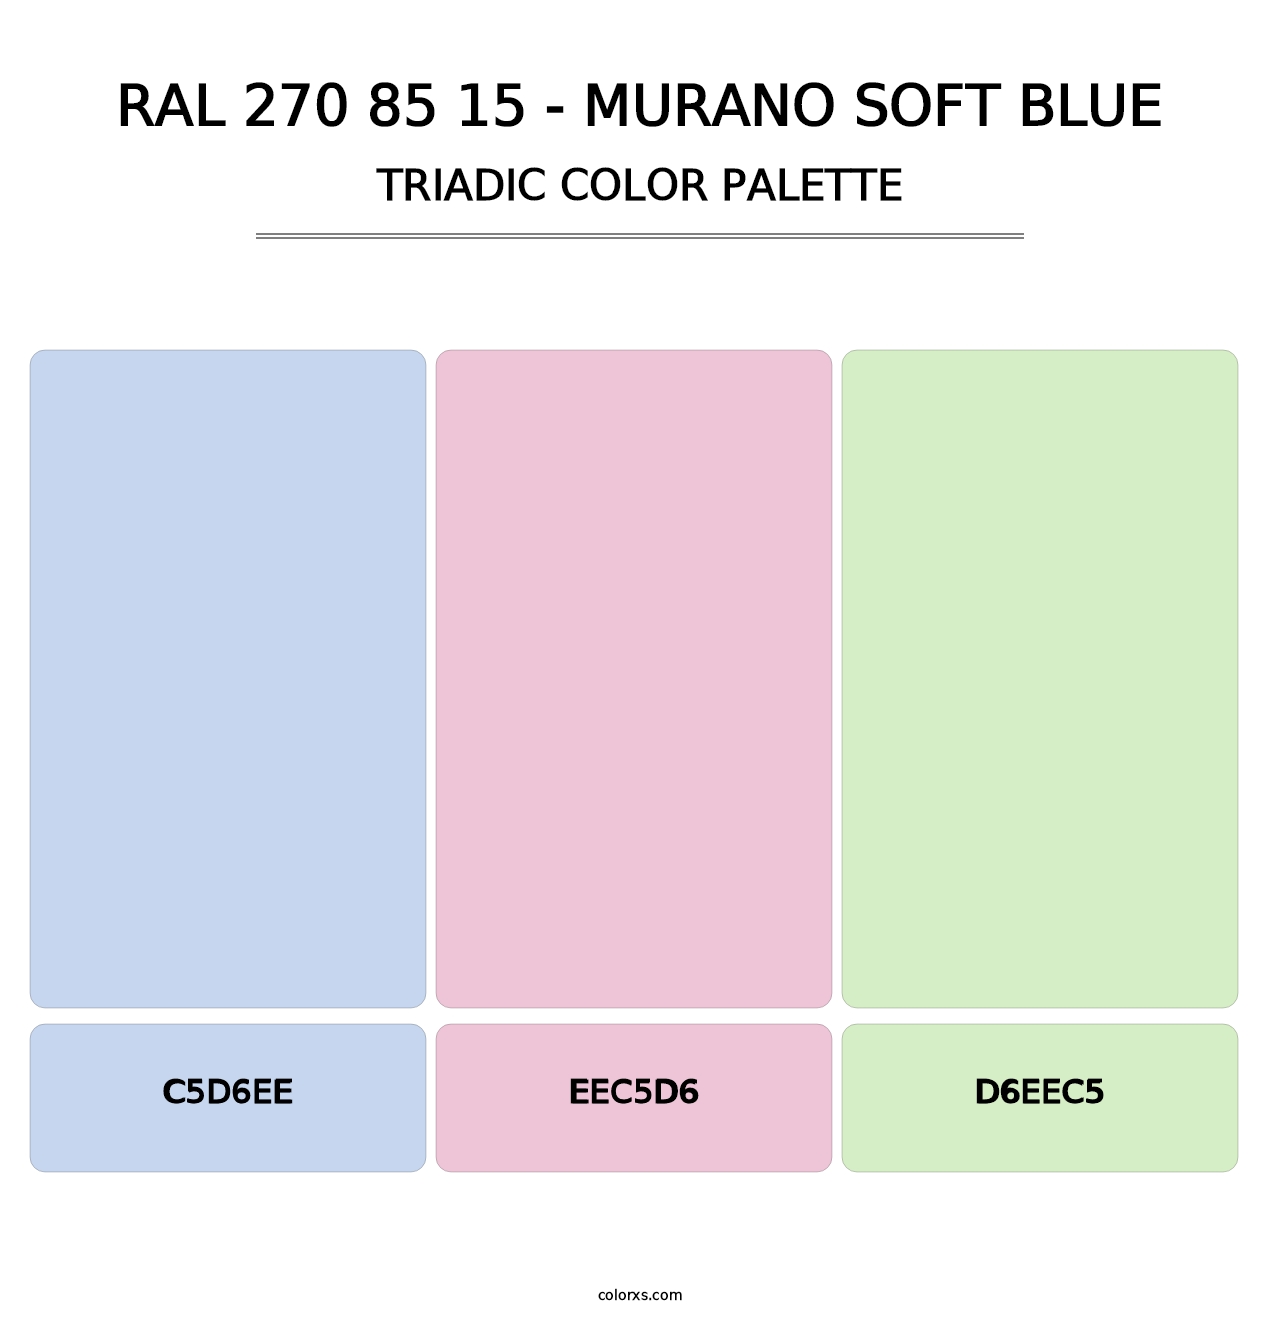 RAL 270 85 15 - Murano Soft Blue - Triadic Color Palette